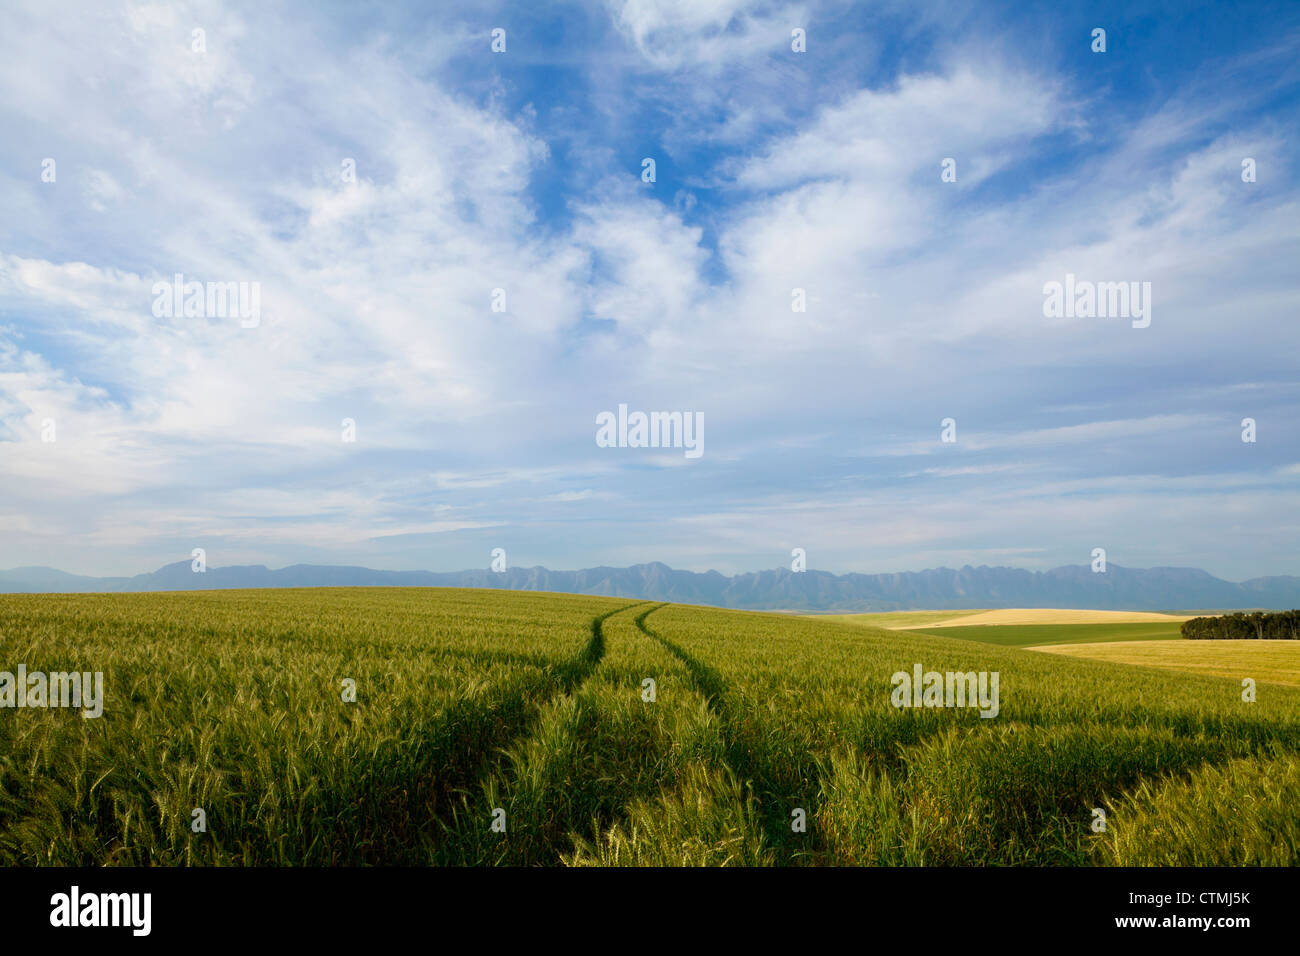 Lush green wheat field with Riviersonderend mountains on horizon, Overberg, South Africa Stock Photo